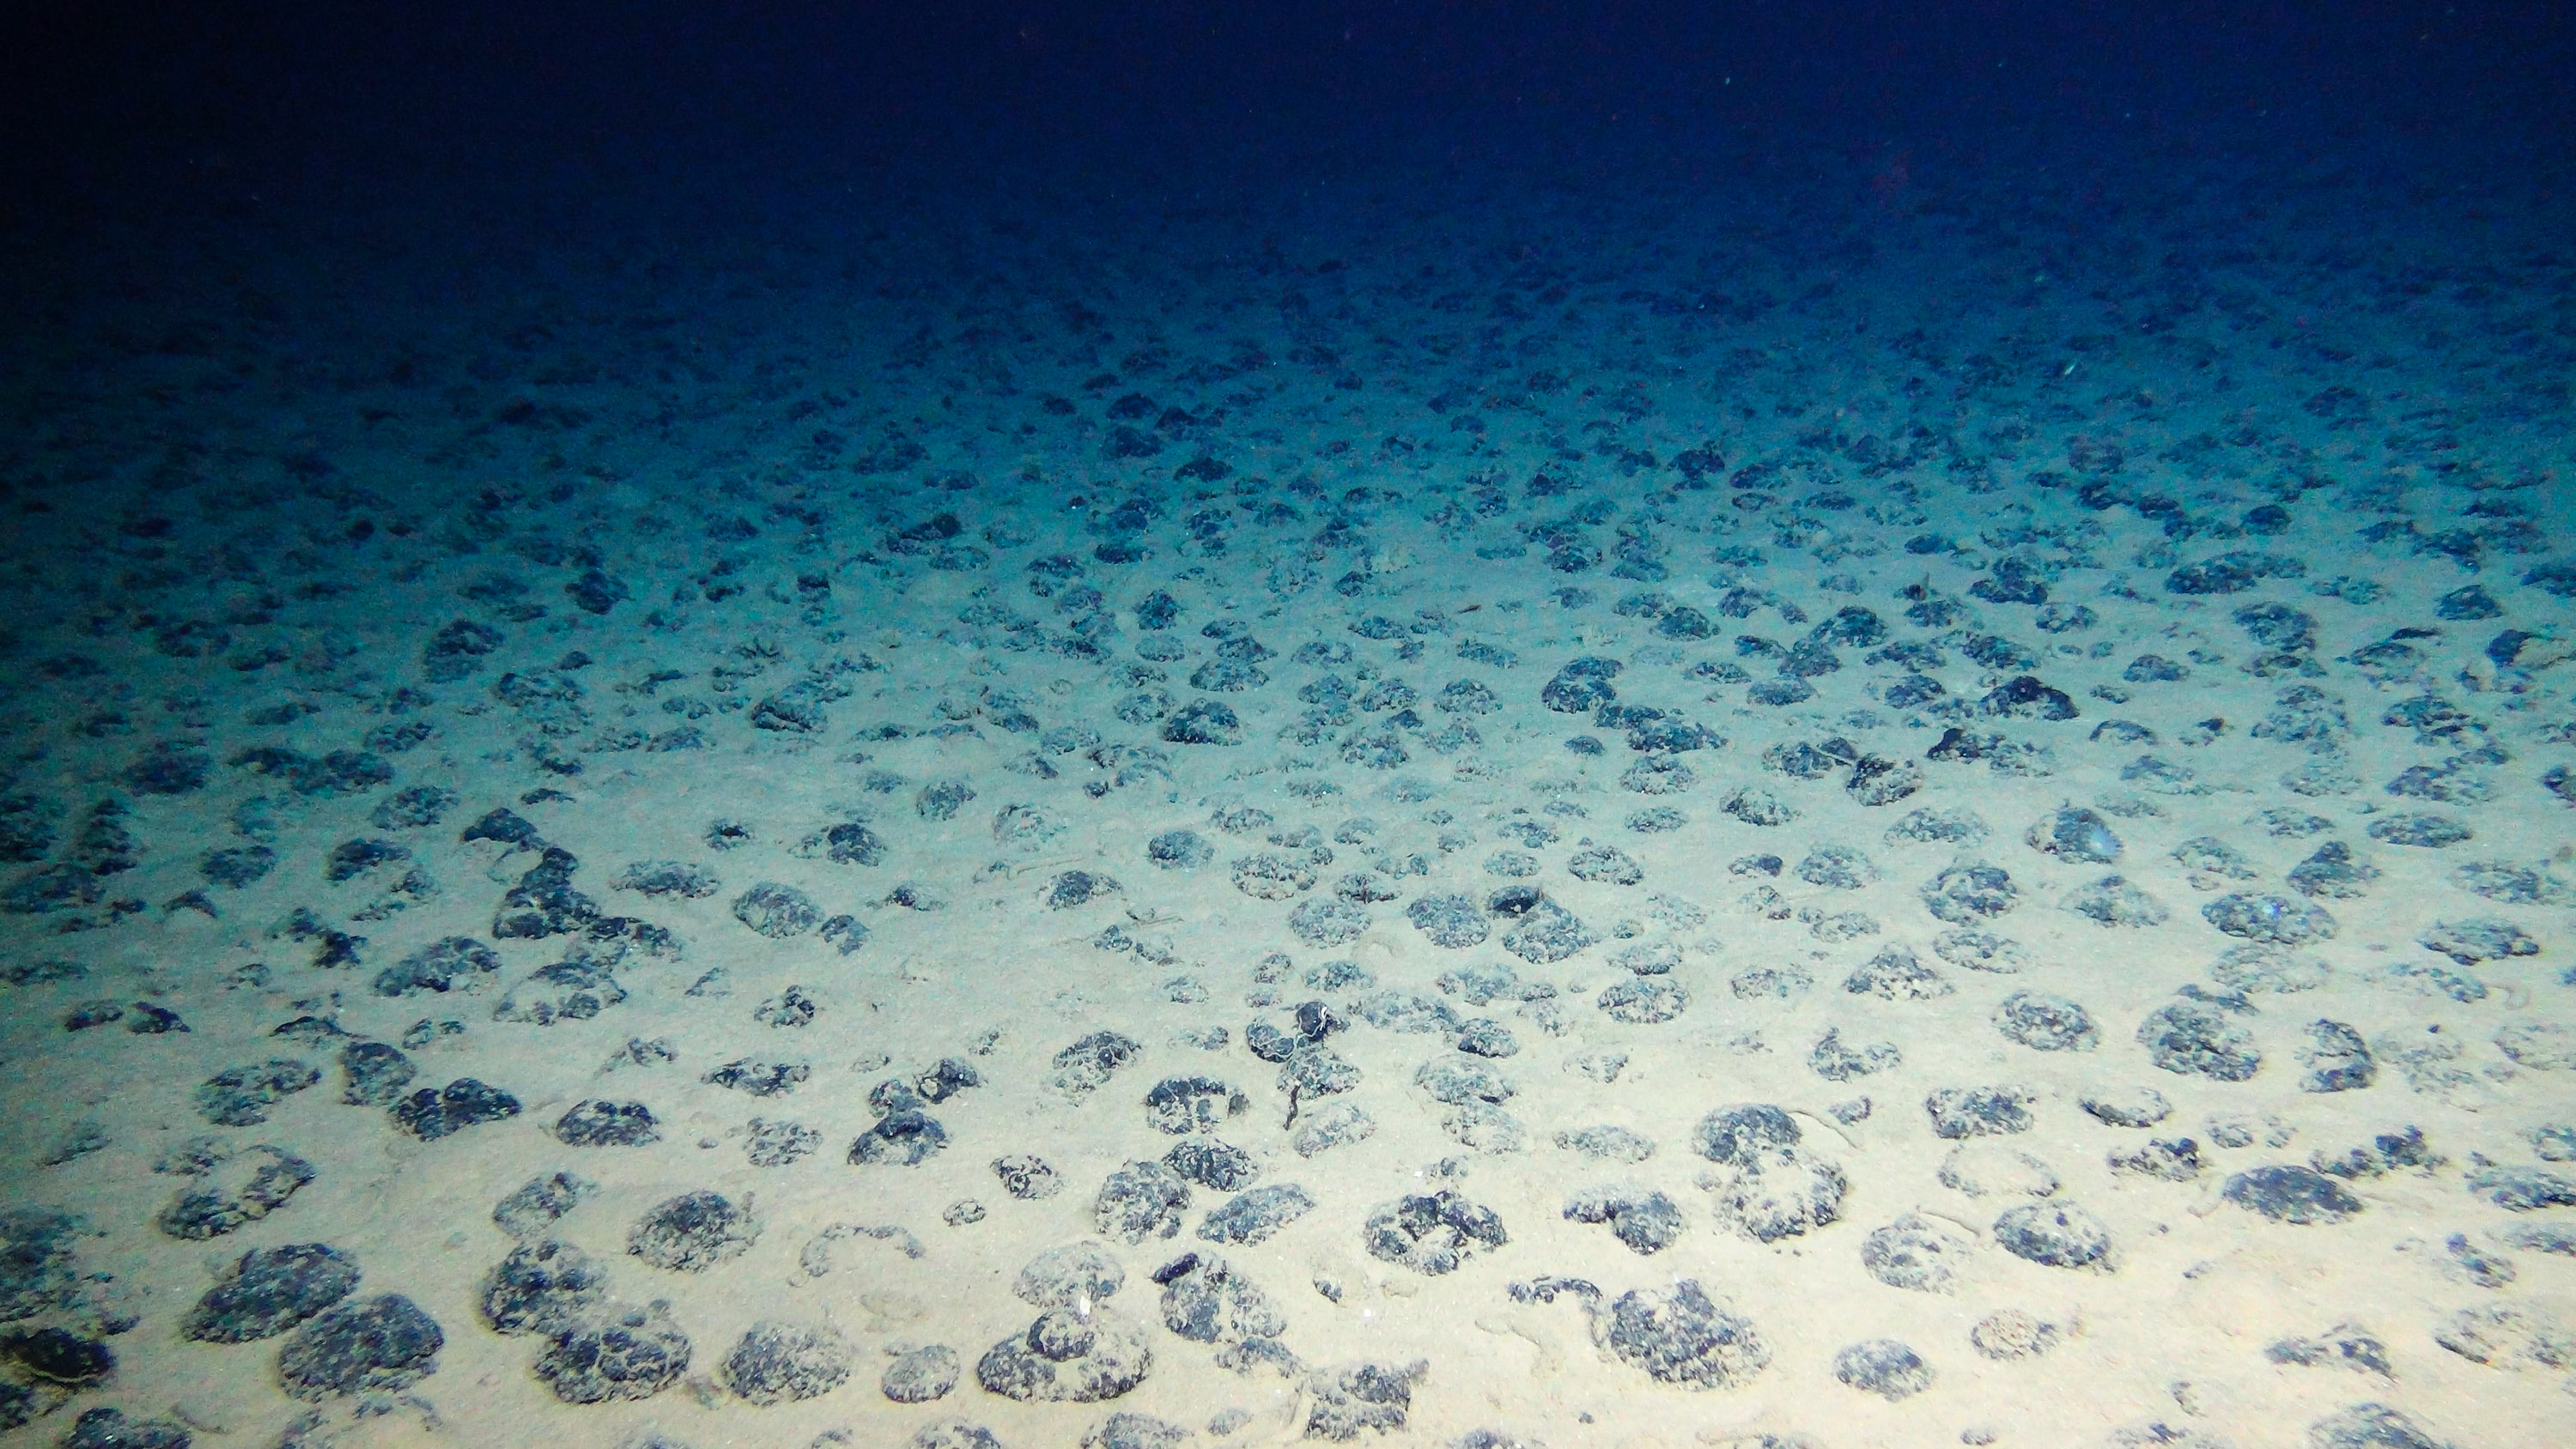 manganese nodules in the Clarion Clipperton Fracture Zone seabed